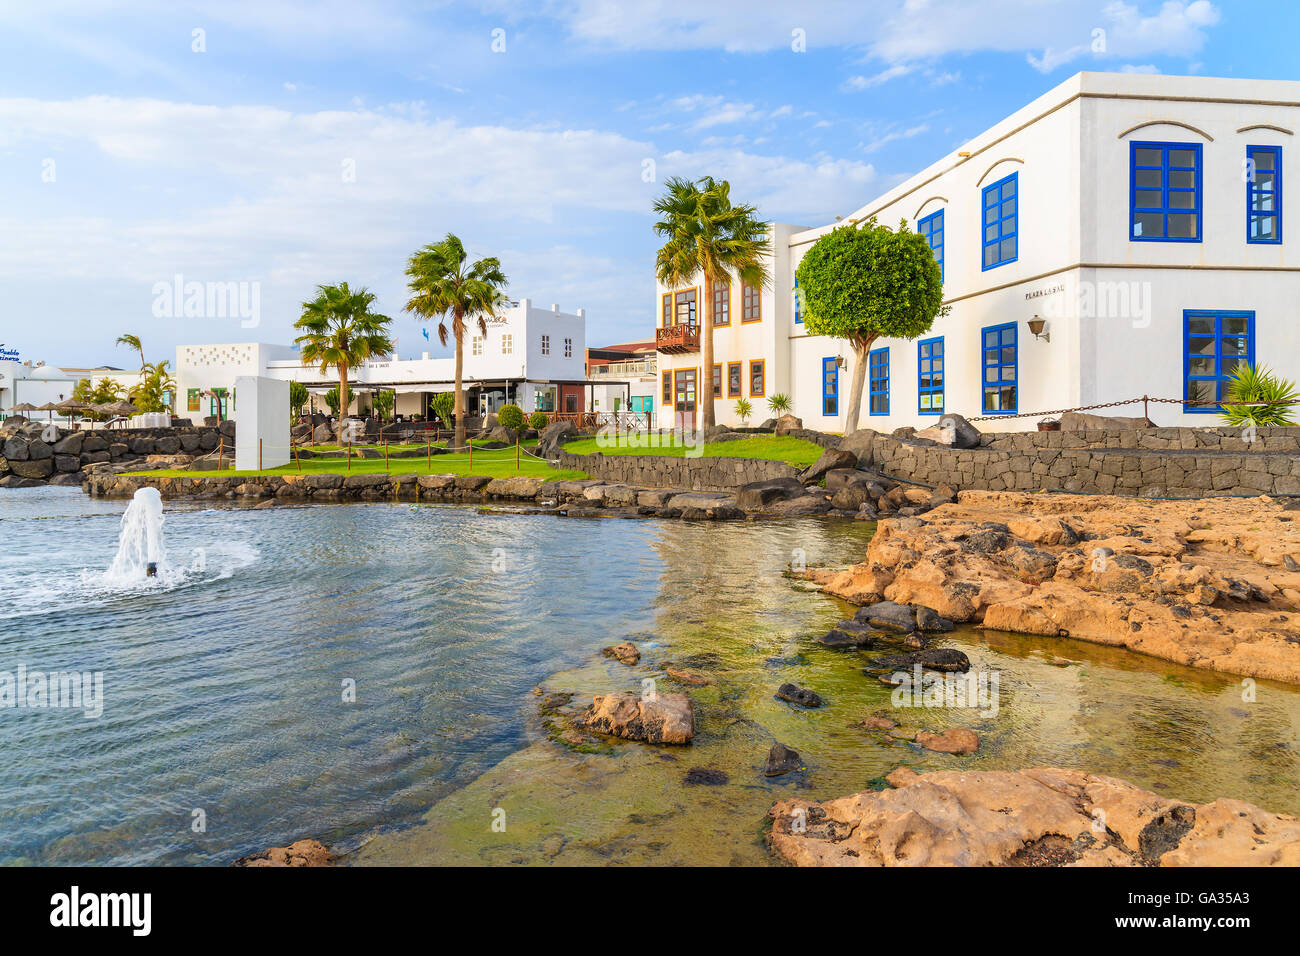 MARINA RUBICON, LANZAROTE ISLAND - JAN 11, 2015: typical Canarian houses in Rubicon port. Canary Islands are popular tourist destination due to sunny tropical climate all year round. Stock Photo